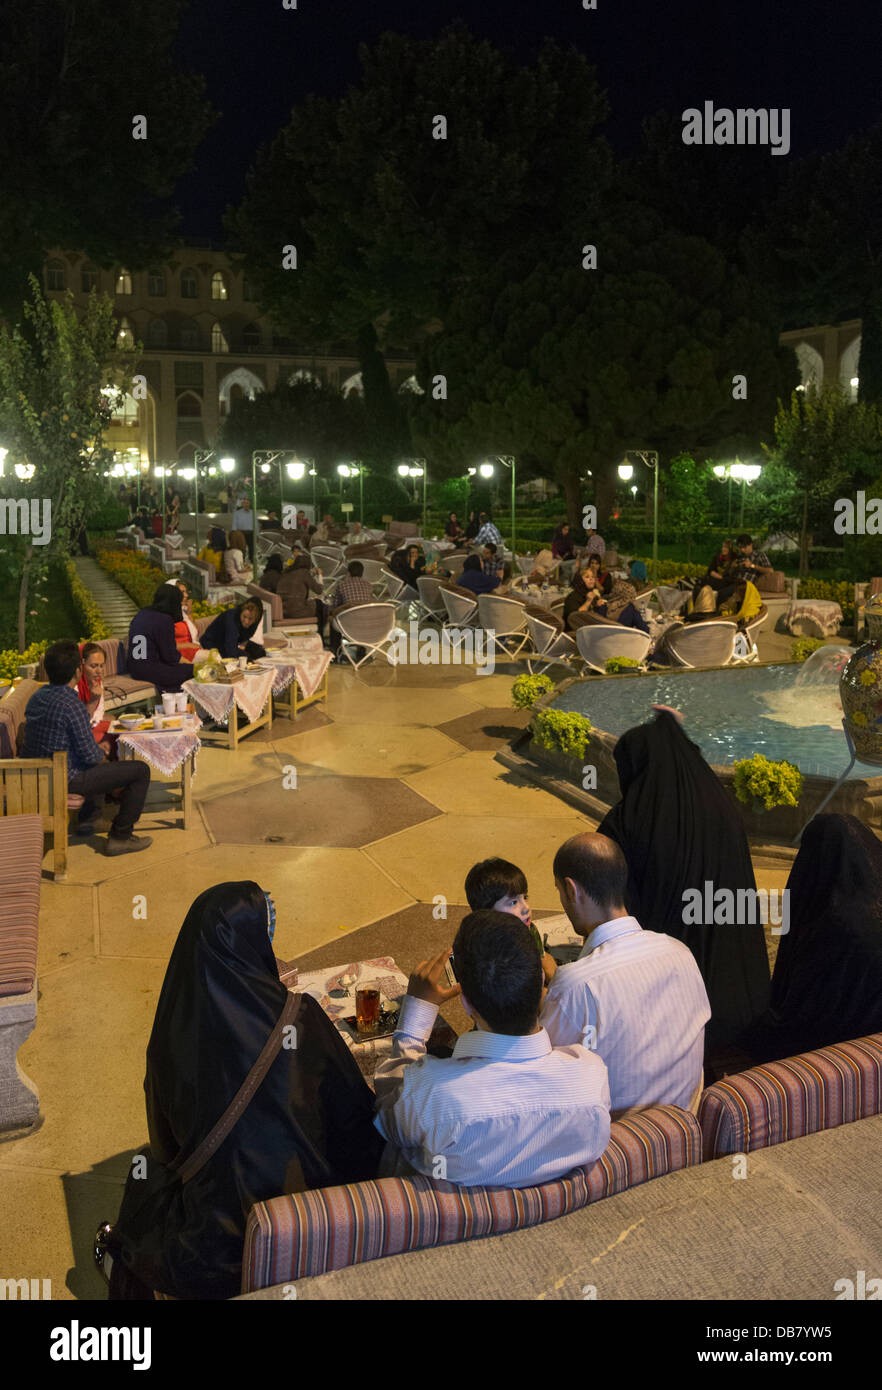 Iranians eating in the Abbasi Hotel, Isfahan, Iran, after breaking their fast during the fasting month of Ramadan Stock Photo